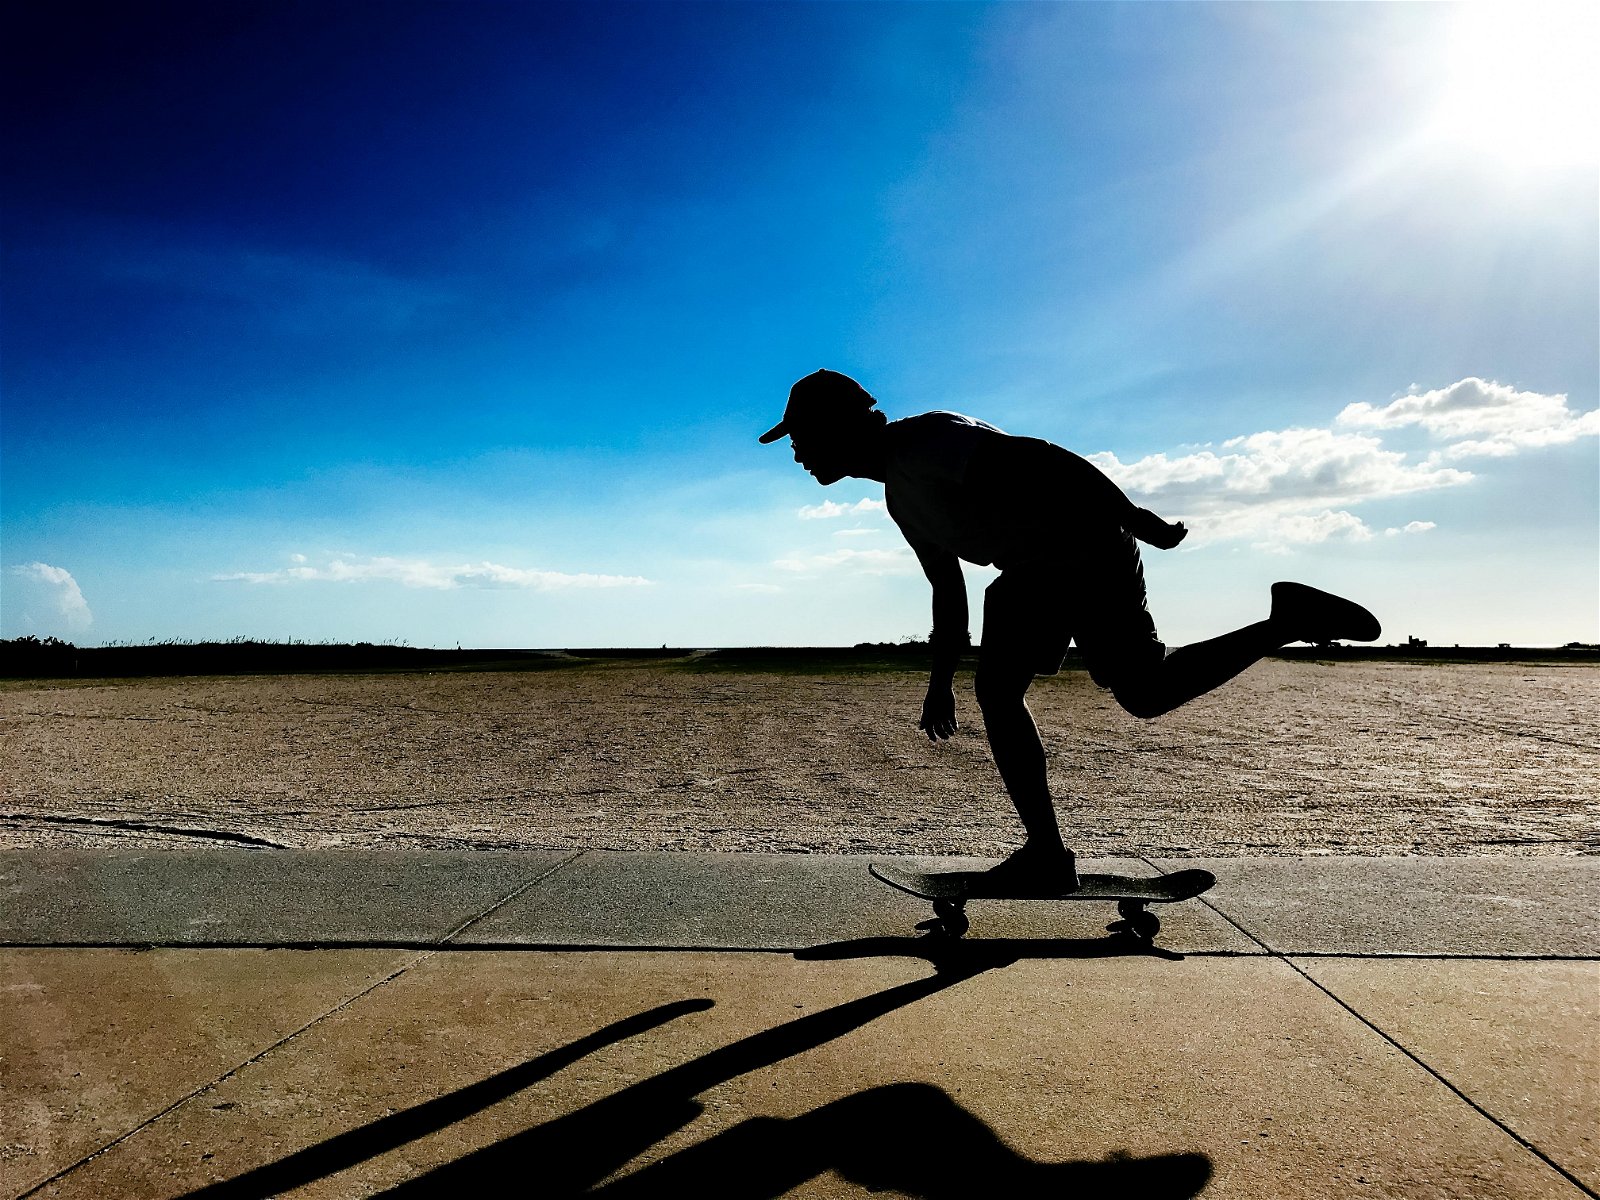 A silhouette and shadow of a skateboarder racing down a sidewalk on a sunny blue-sky day